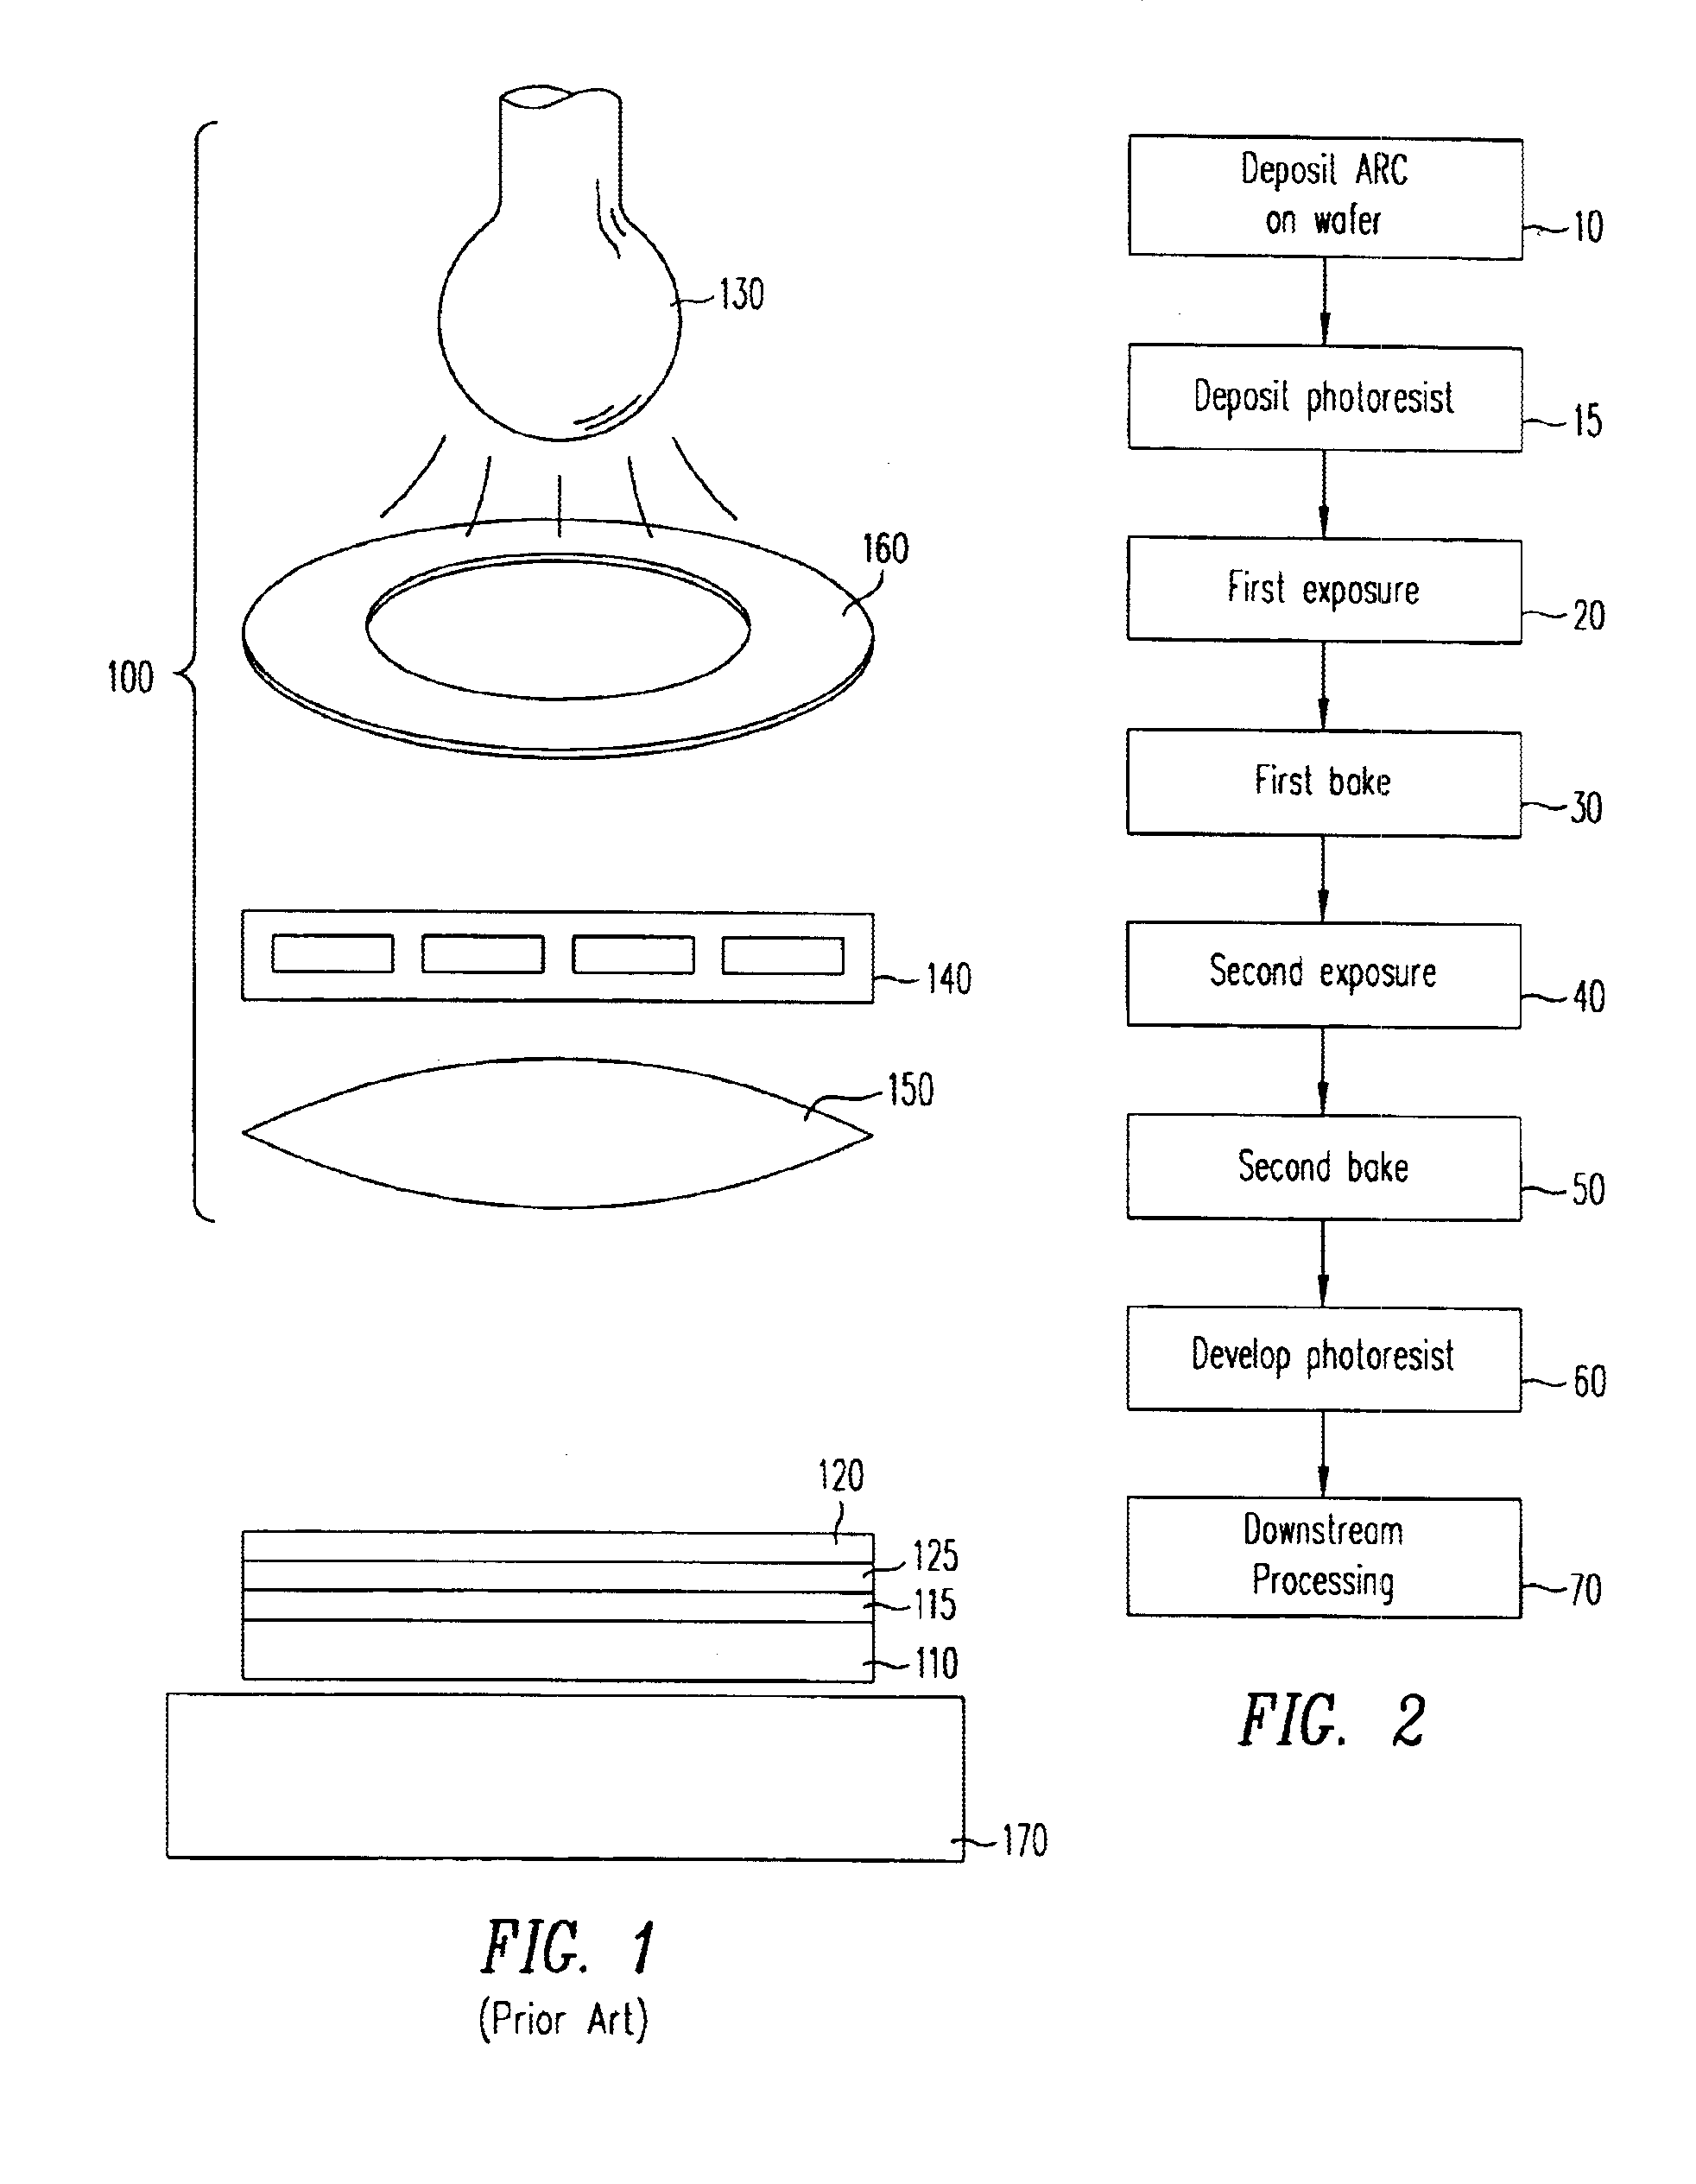 Photolithography method including a double exposure/double bake